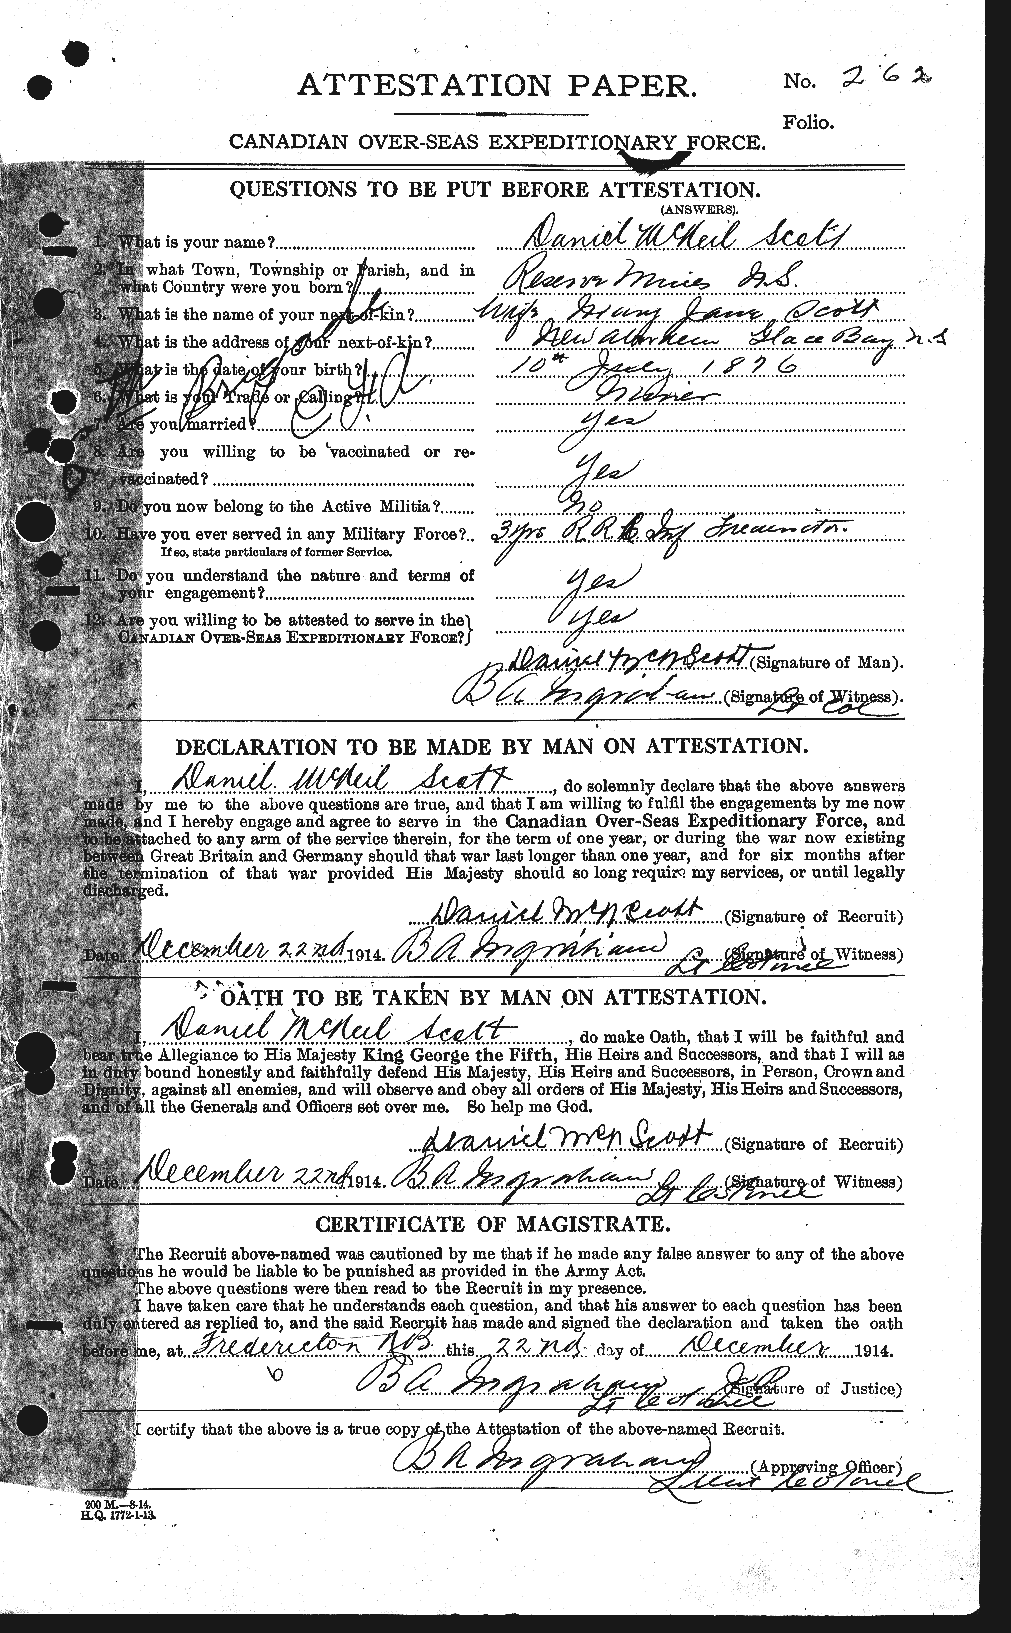 Personnel Records of the First World War - CEF 085614a